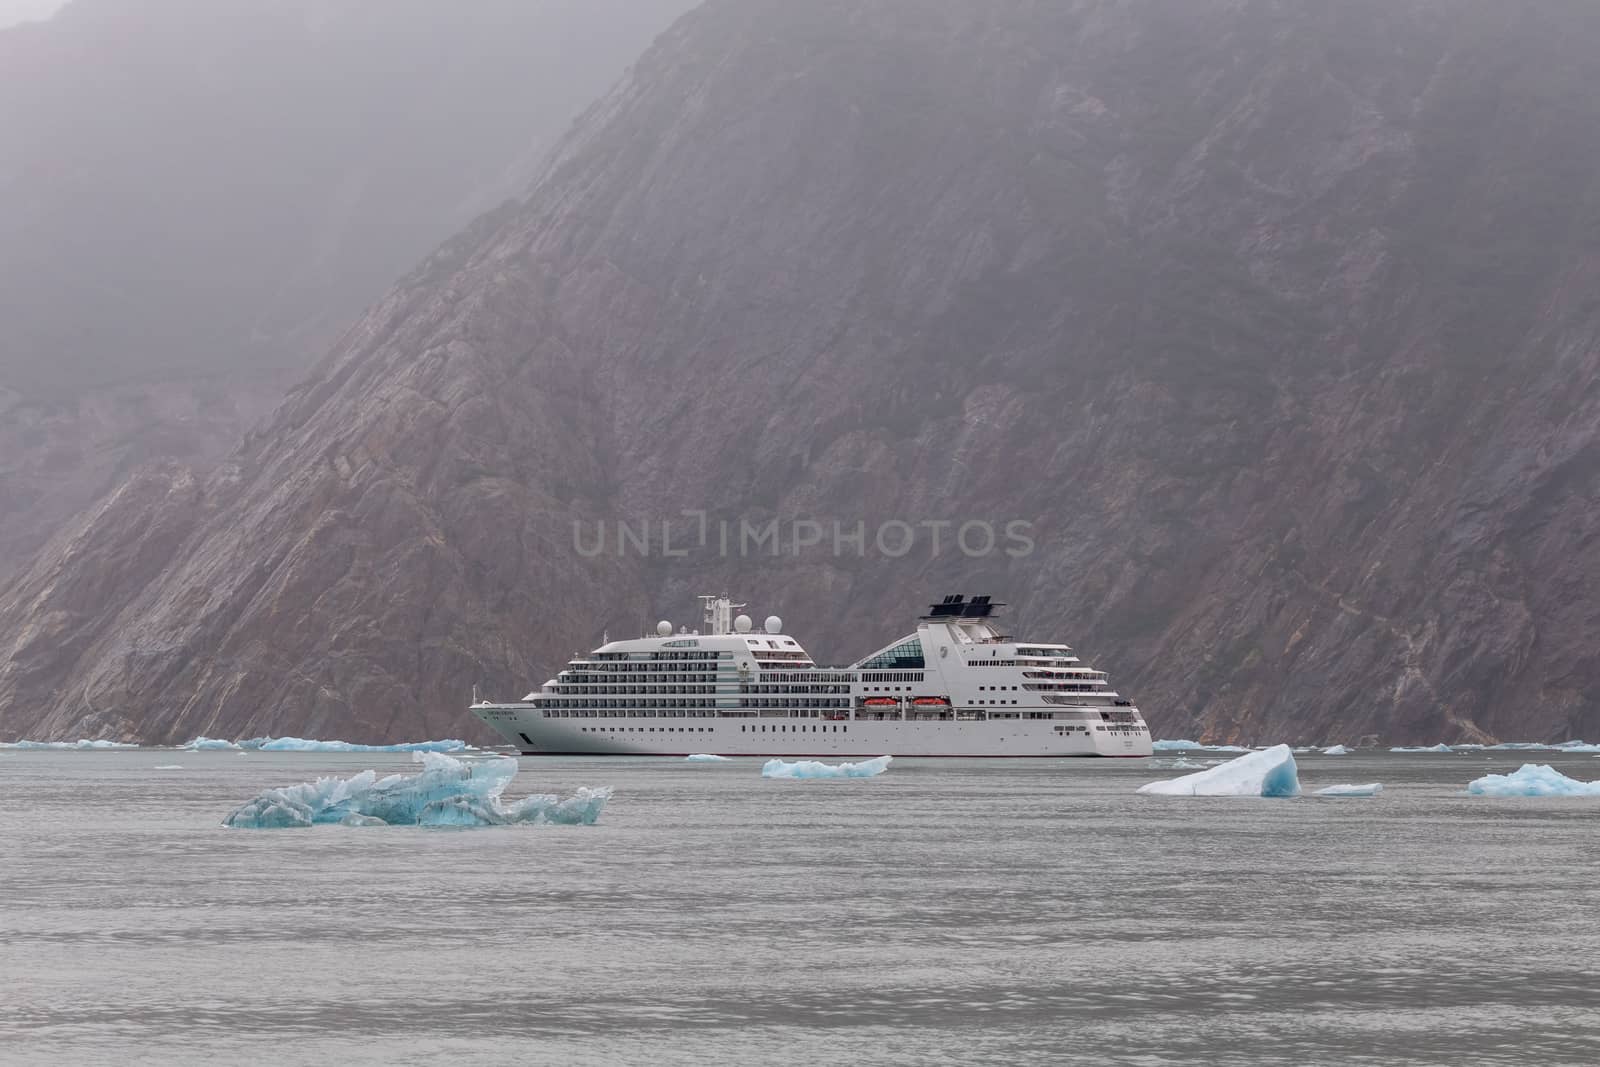 Tracy Arm Fjord, Alaska, US - August 23, 2018: Seabourn Sojourn sailing among icebergs with a mountain behind it in Tracy Arm Fjord in Alaska, USA